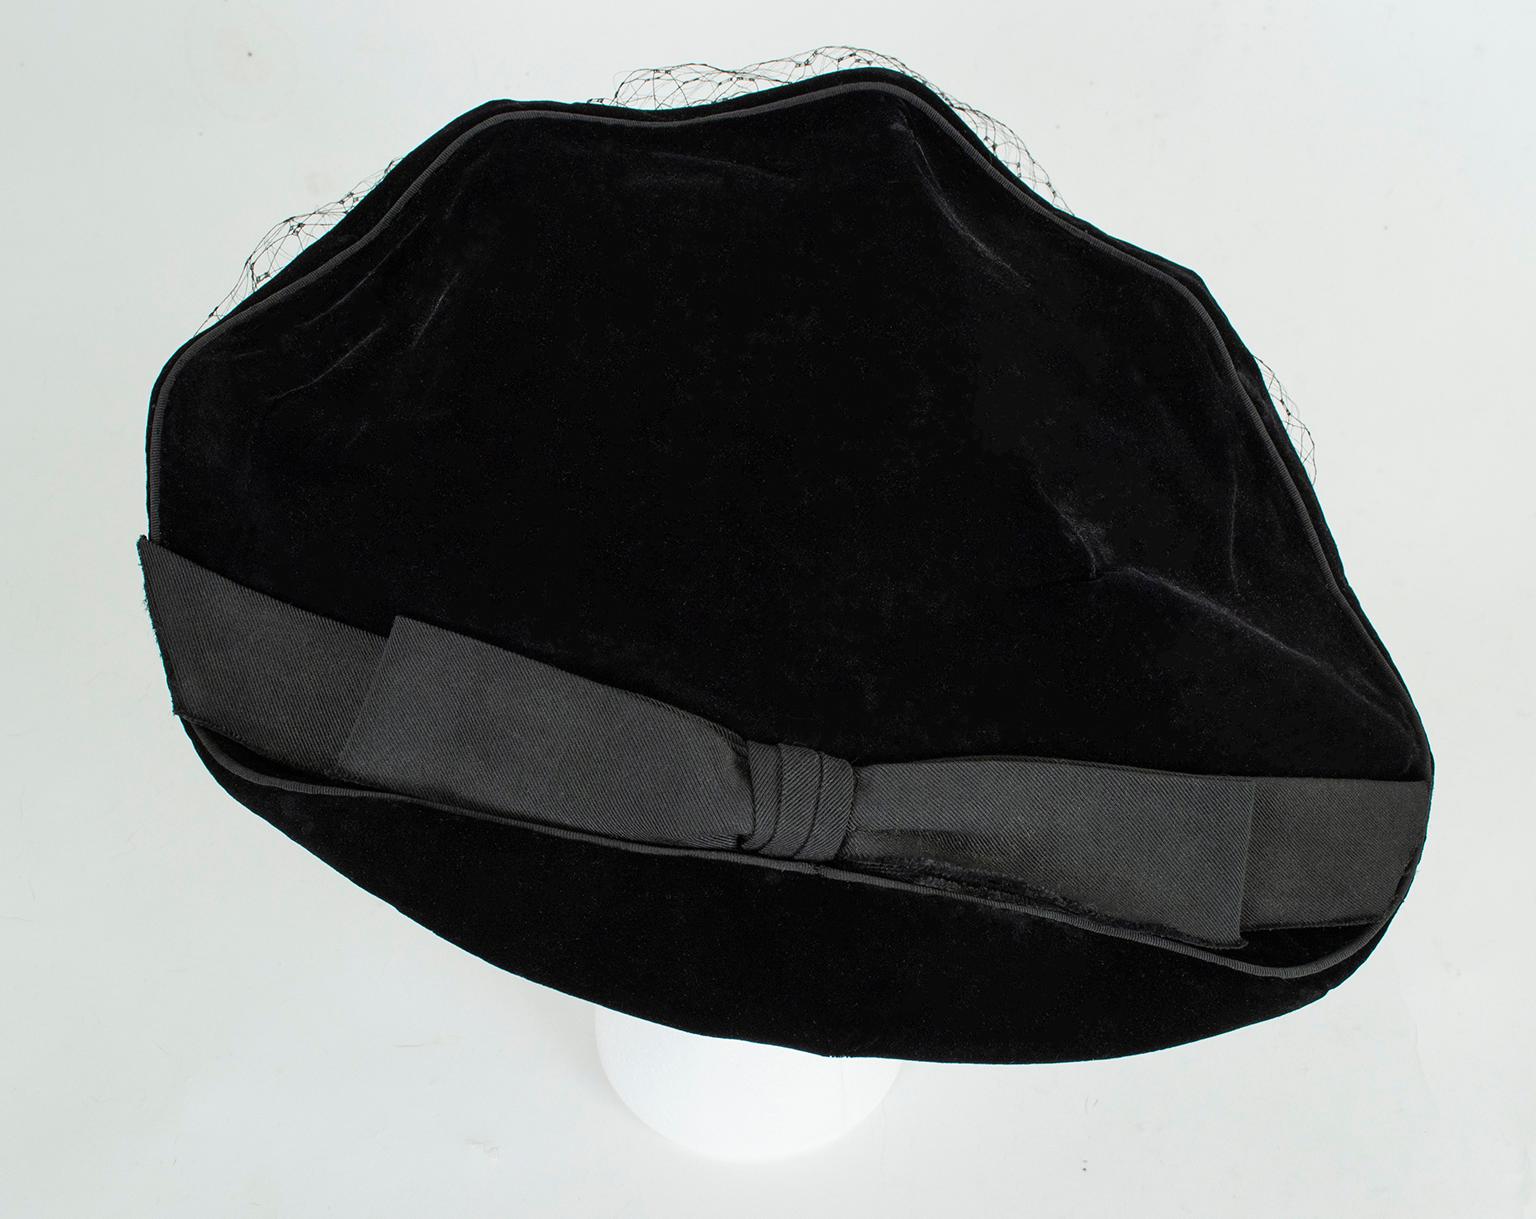 Black Velvet Bubble Veil Clamshell Saucer Hat with Provenance – O/S, 1930s In Good Condition For Sale In Tucson, AZ